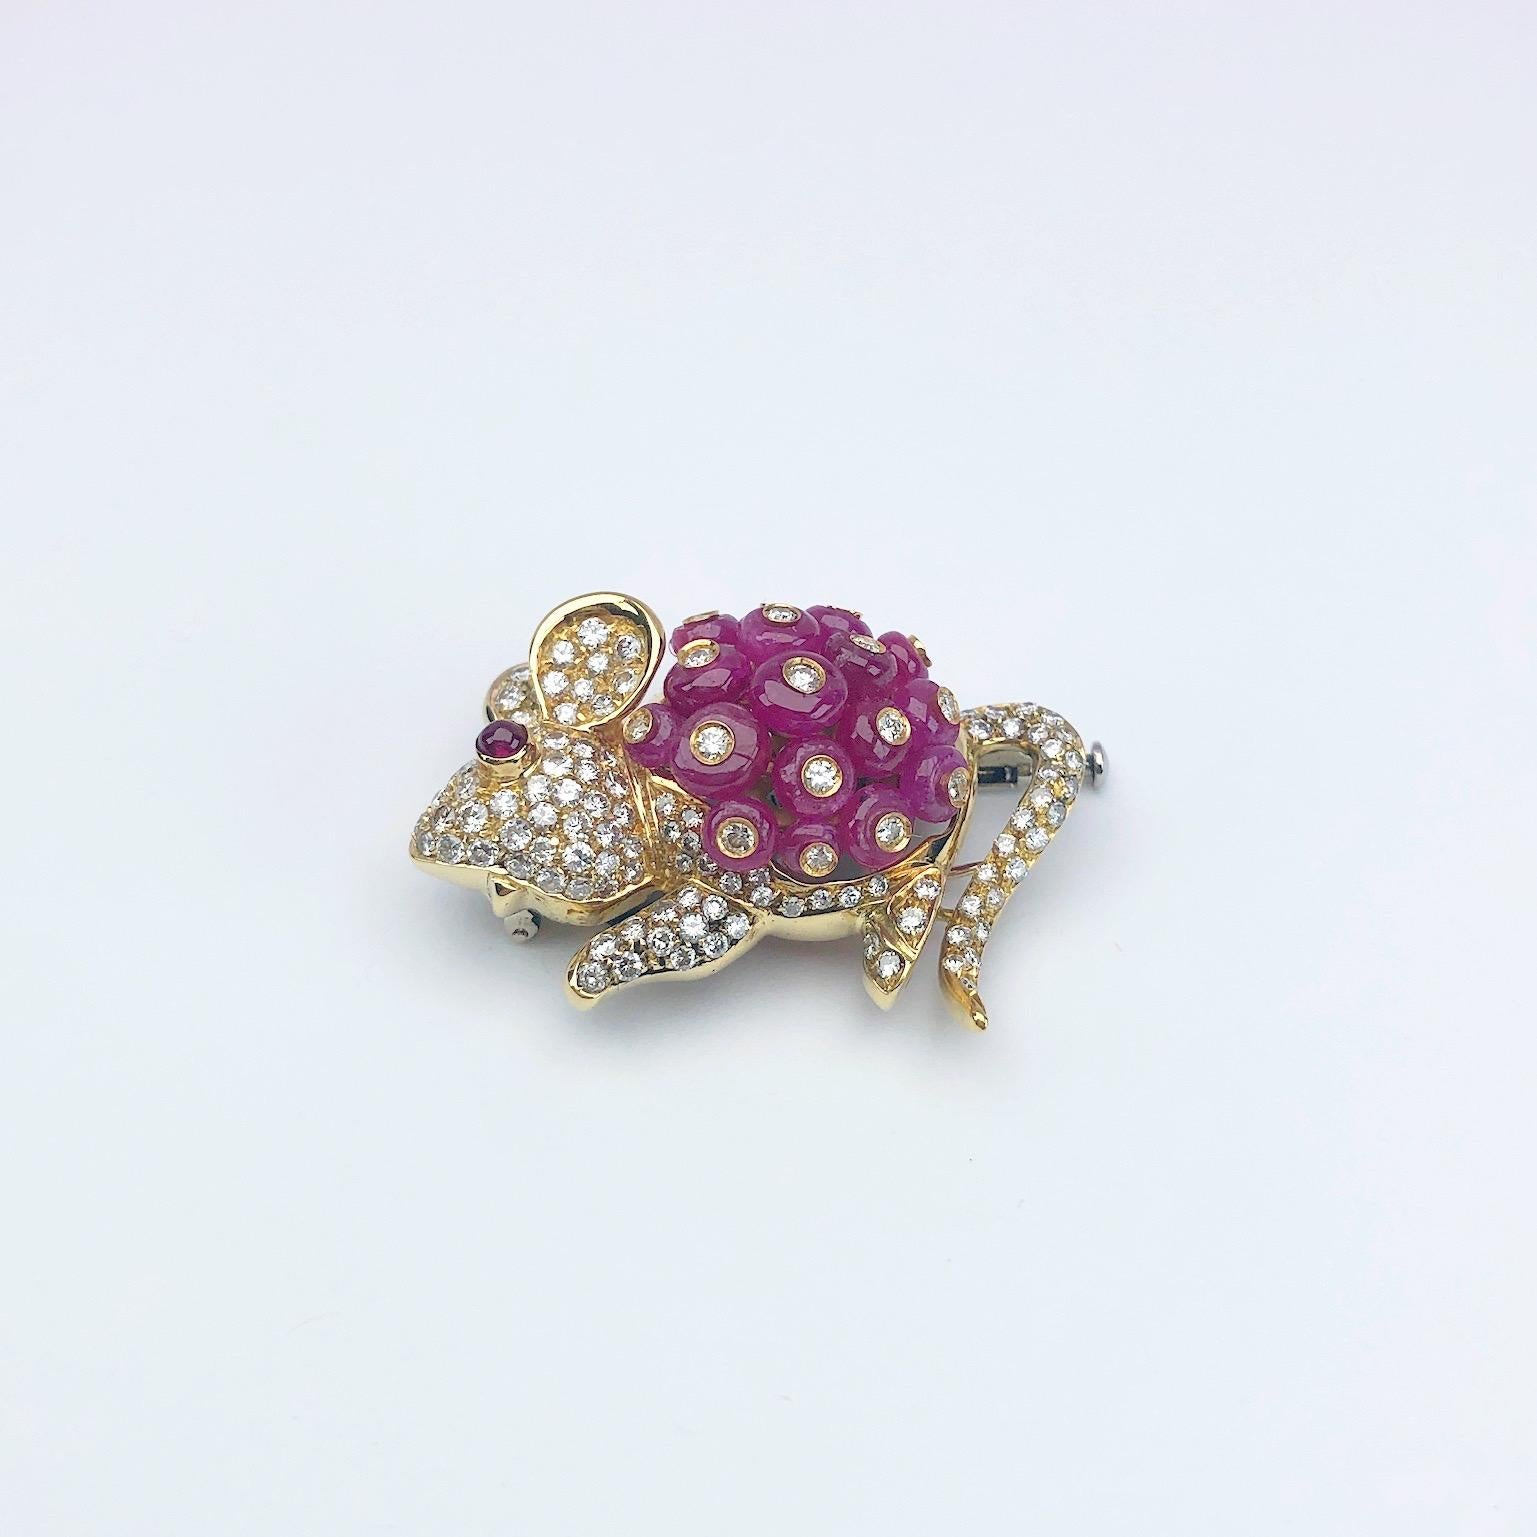 Retro Giovane Italy 18 Karat Gold Mouse Brooch, 9.75 Carat Beaded Rubies and Diamonds For Sale